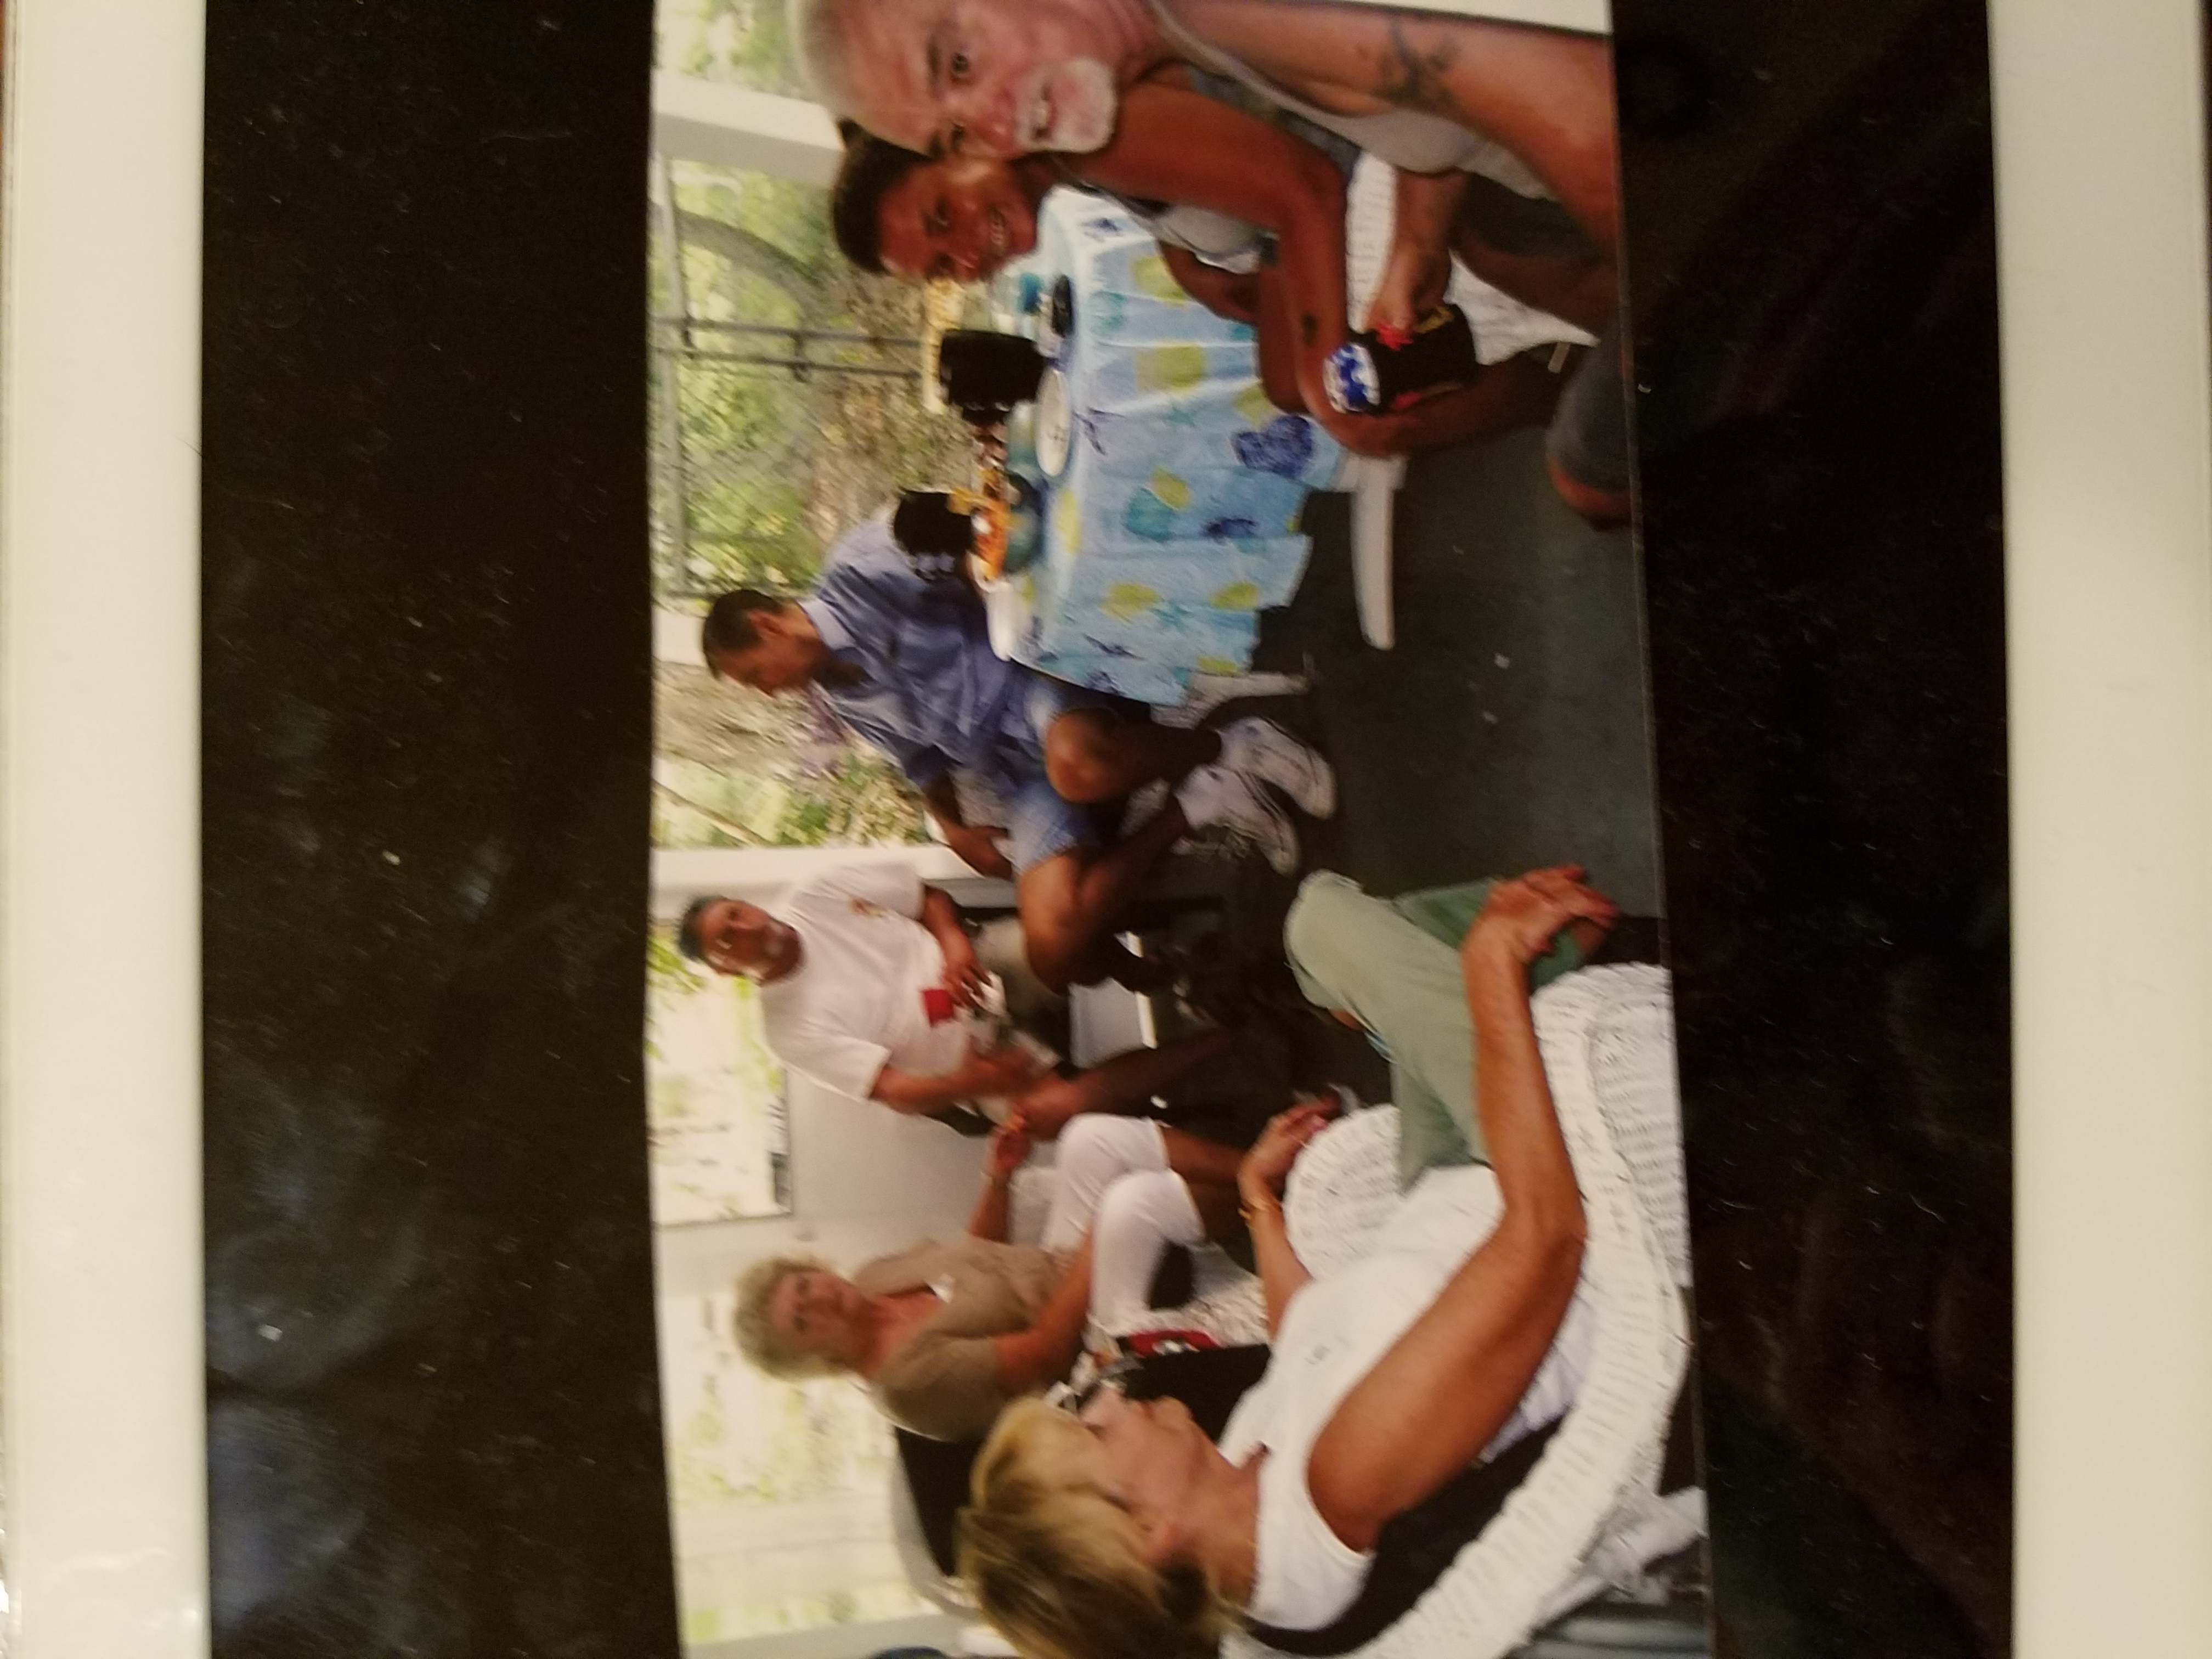 Florida 3 years ago with her brother x sister in law..her neice Me..Her x boyfriend..who she loved so very much..and her sister robertas x..Jim...what a great Memory this fay was..we all were Smiling..May you rest..your work here is done..god caled ypu home..ypur now telling all a great Story..from Down here..im Sure Jimmy got his Ear to your Mouth .LOL rest now...love you so di xoxo